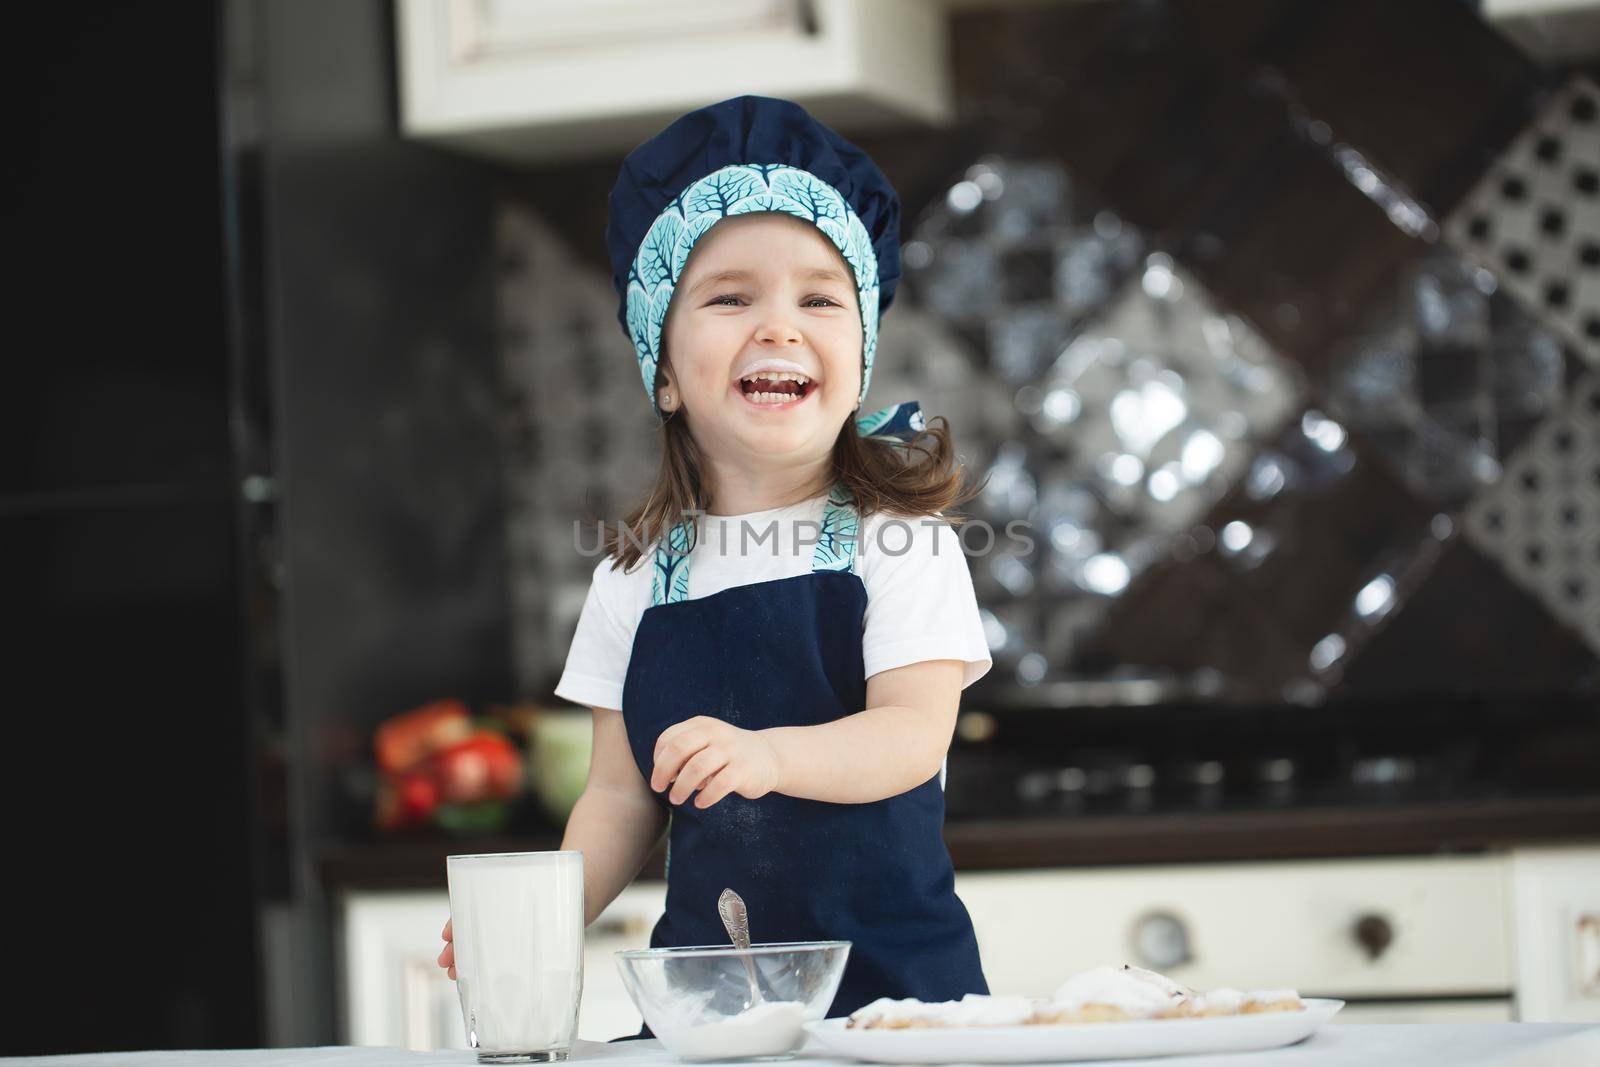 Small girl in the kitchen in an apron and a Chef's hat is drinking milk from a glass glass.